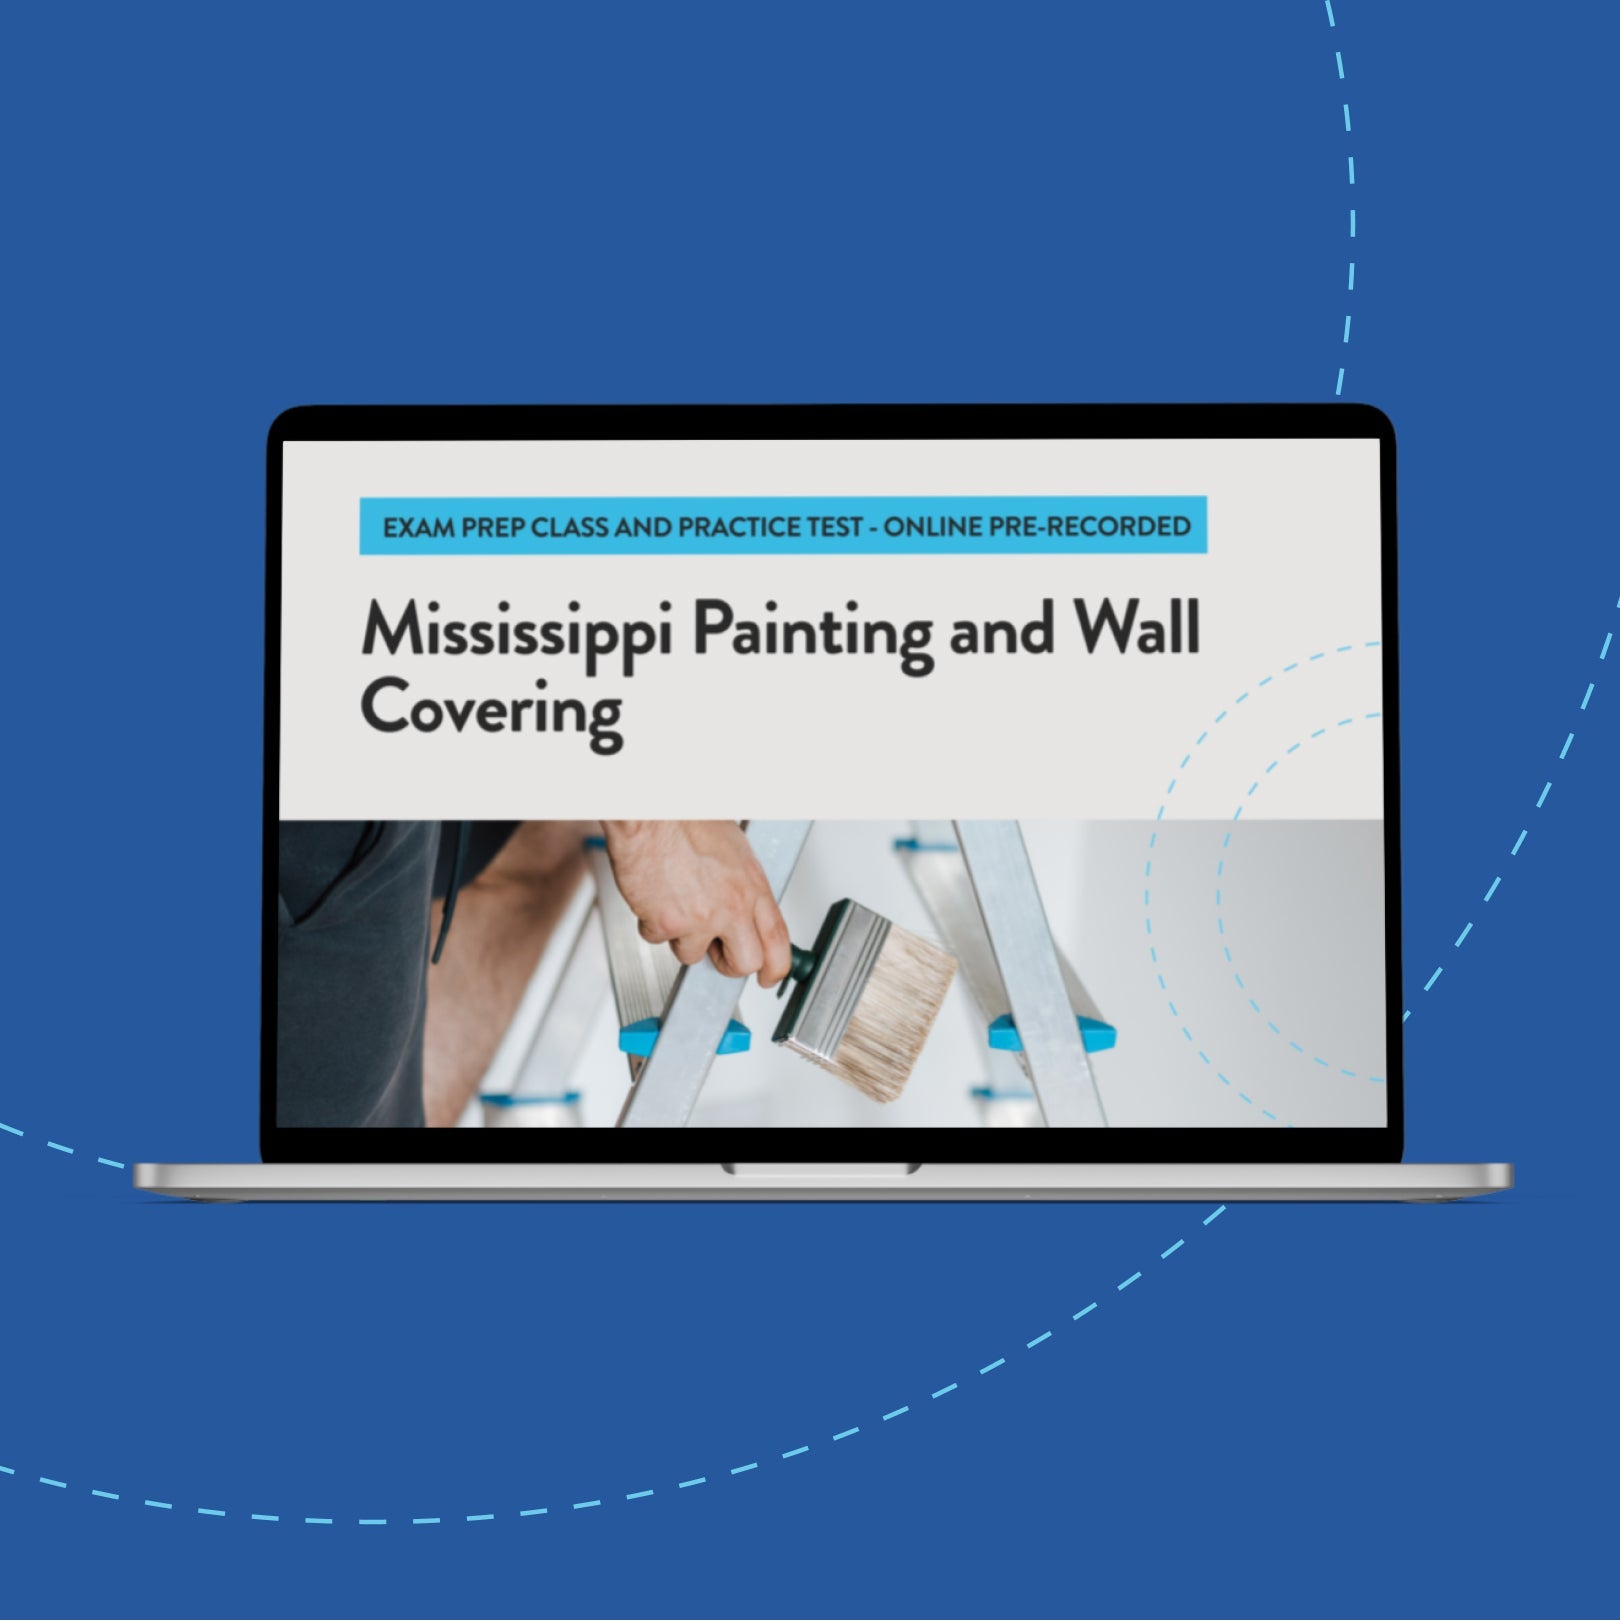 Mississippi Painting and Wall Covering Exam Prep Course